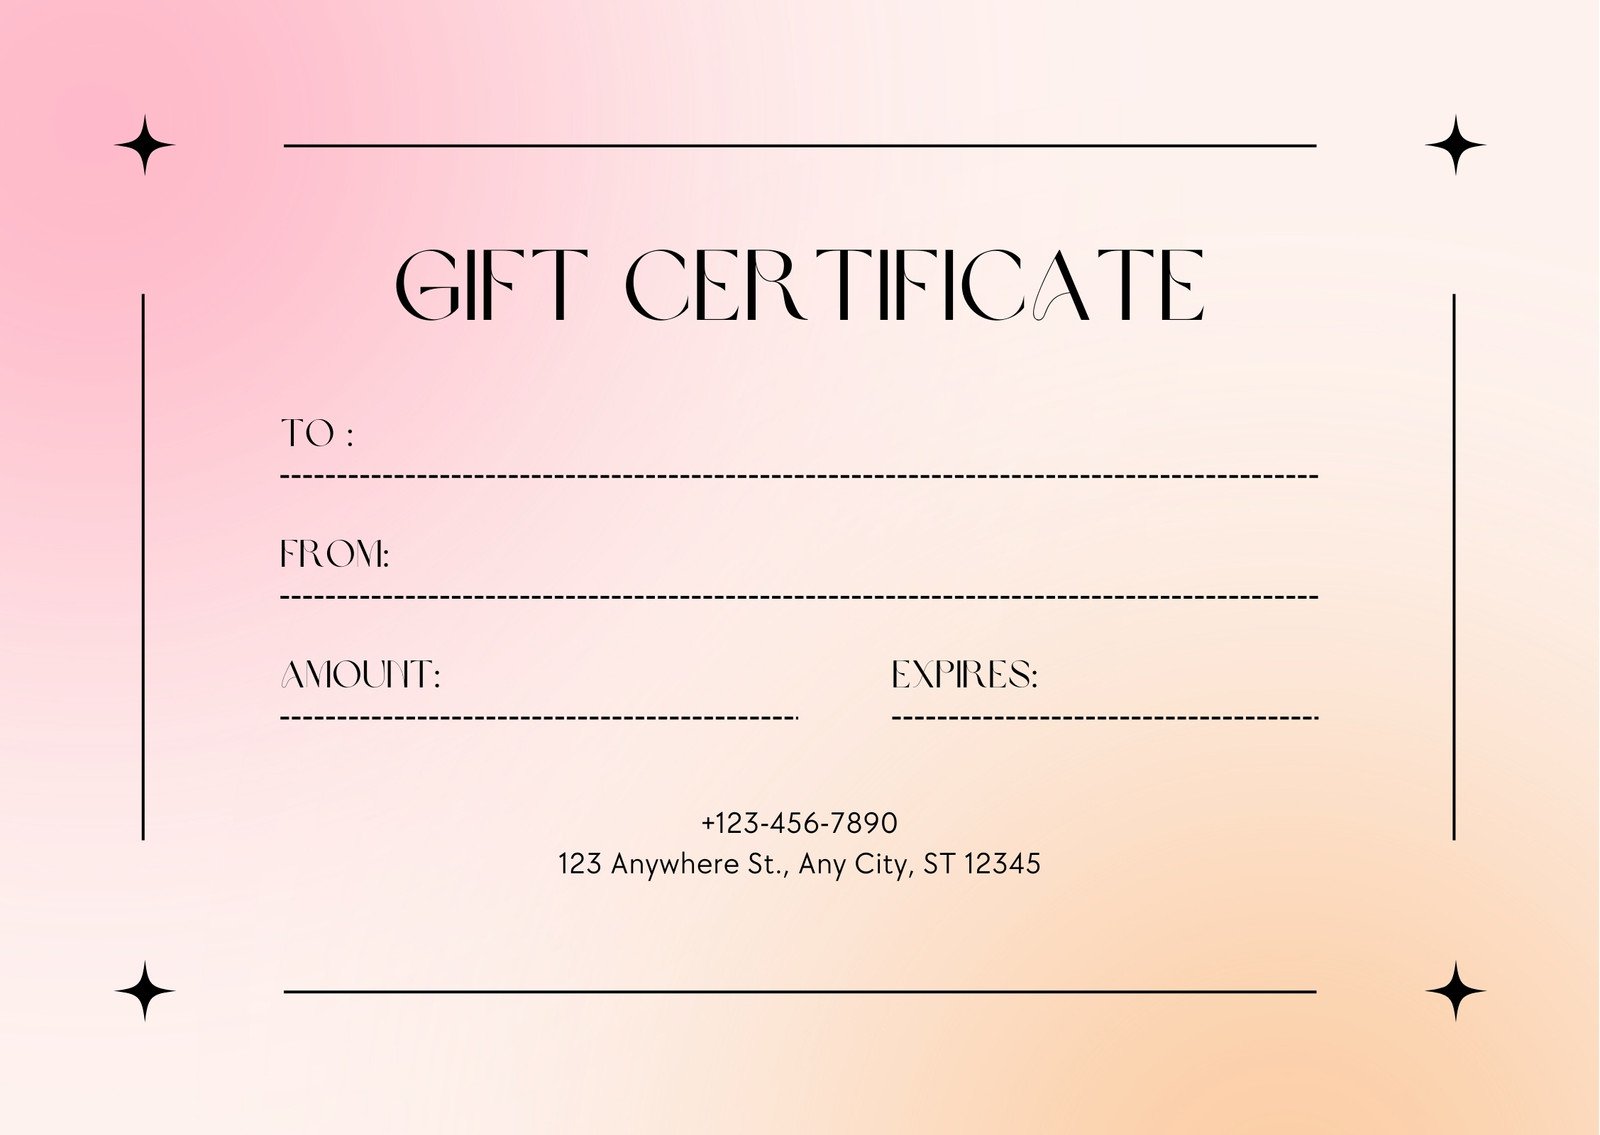 Printable Gift Certificate Templates